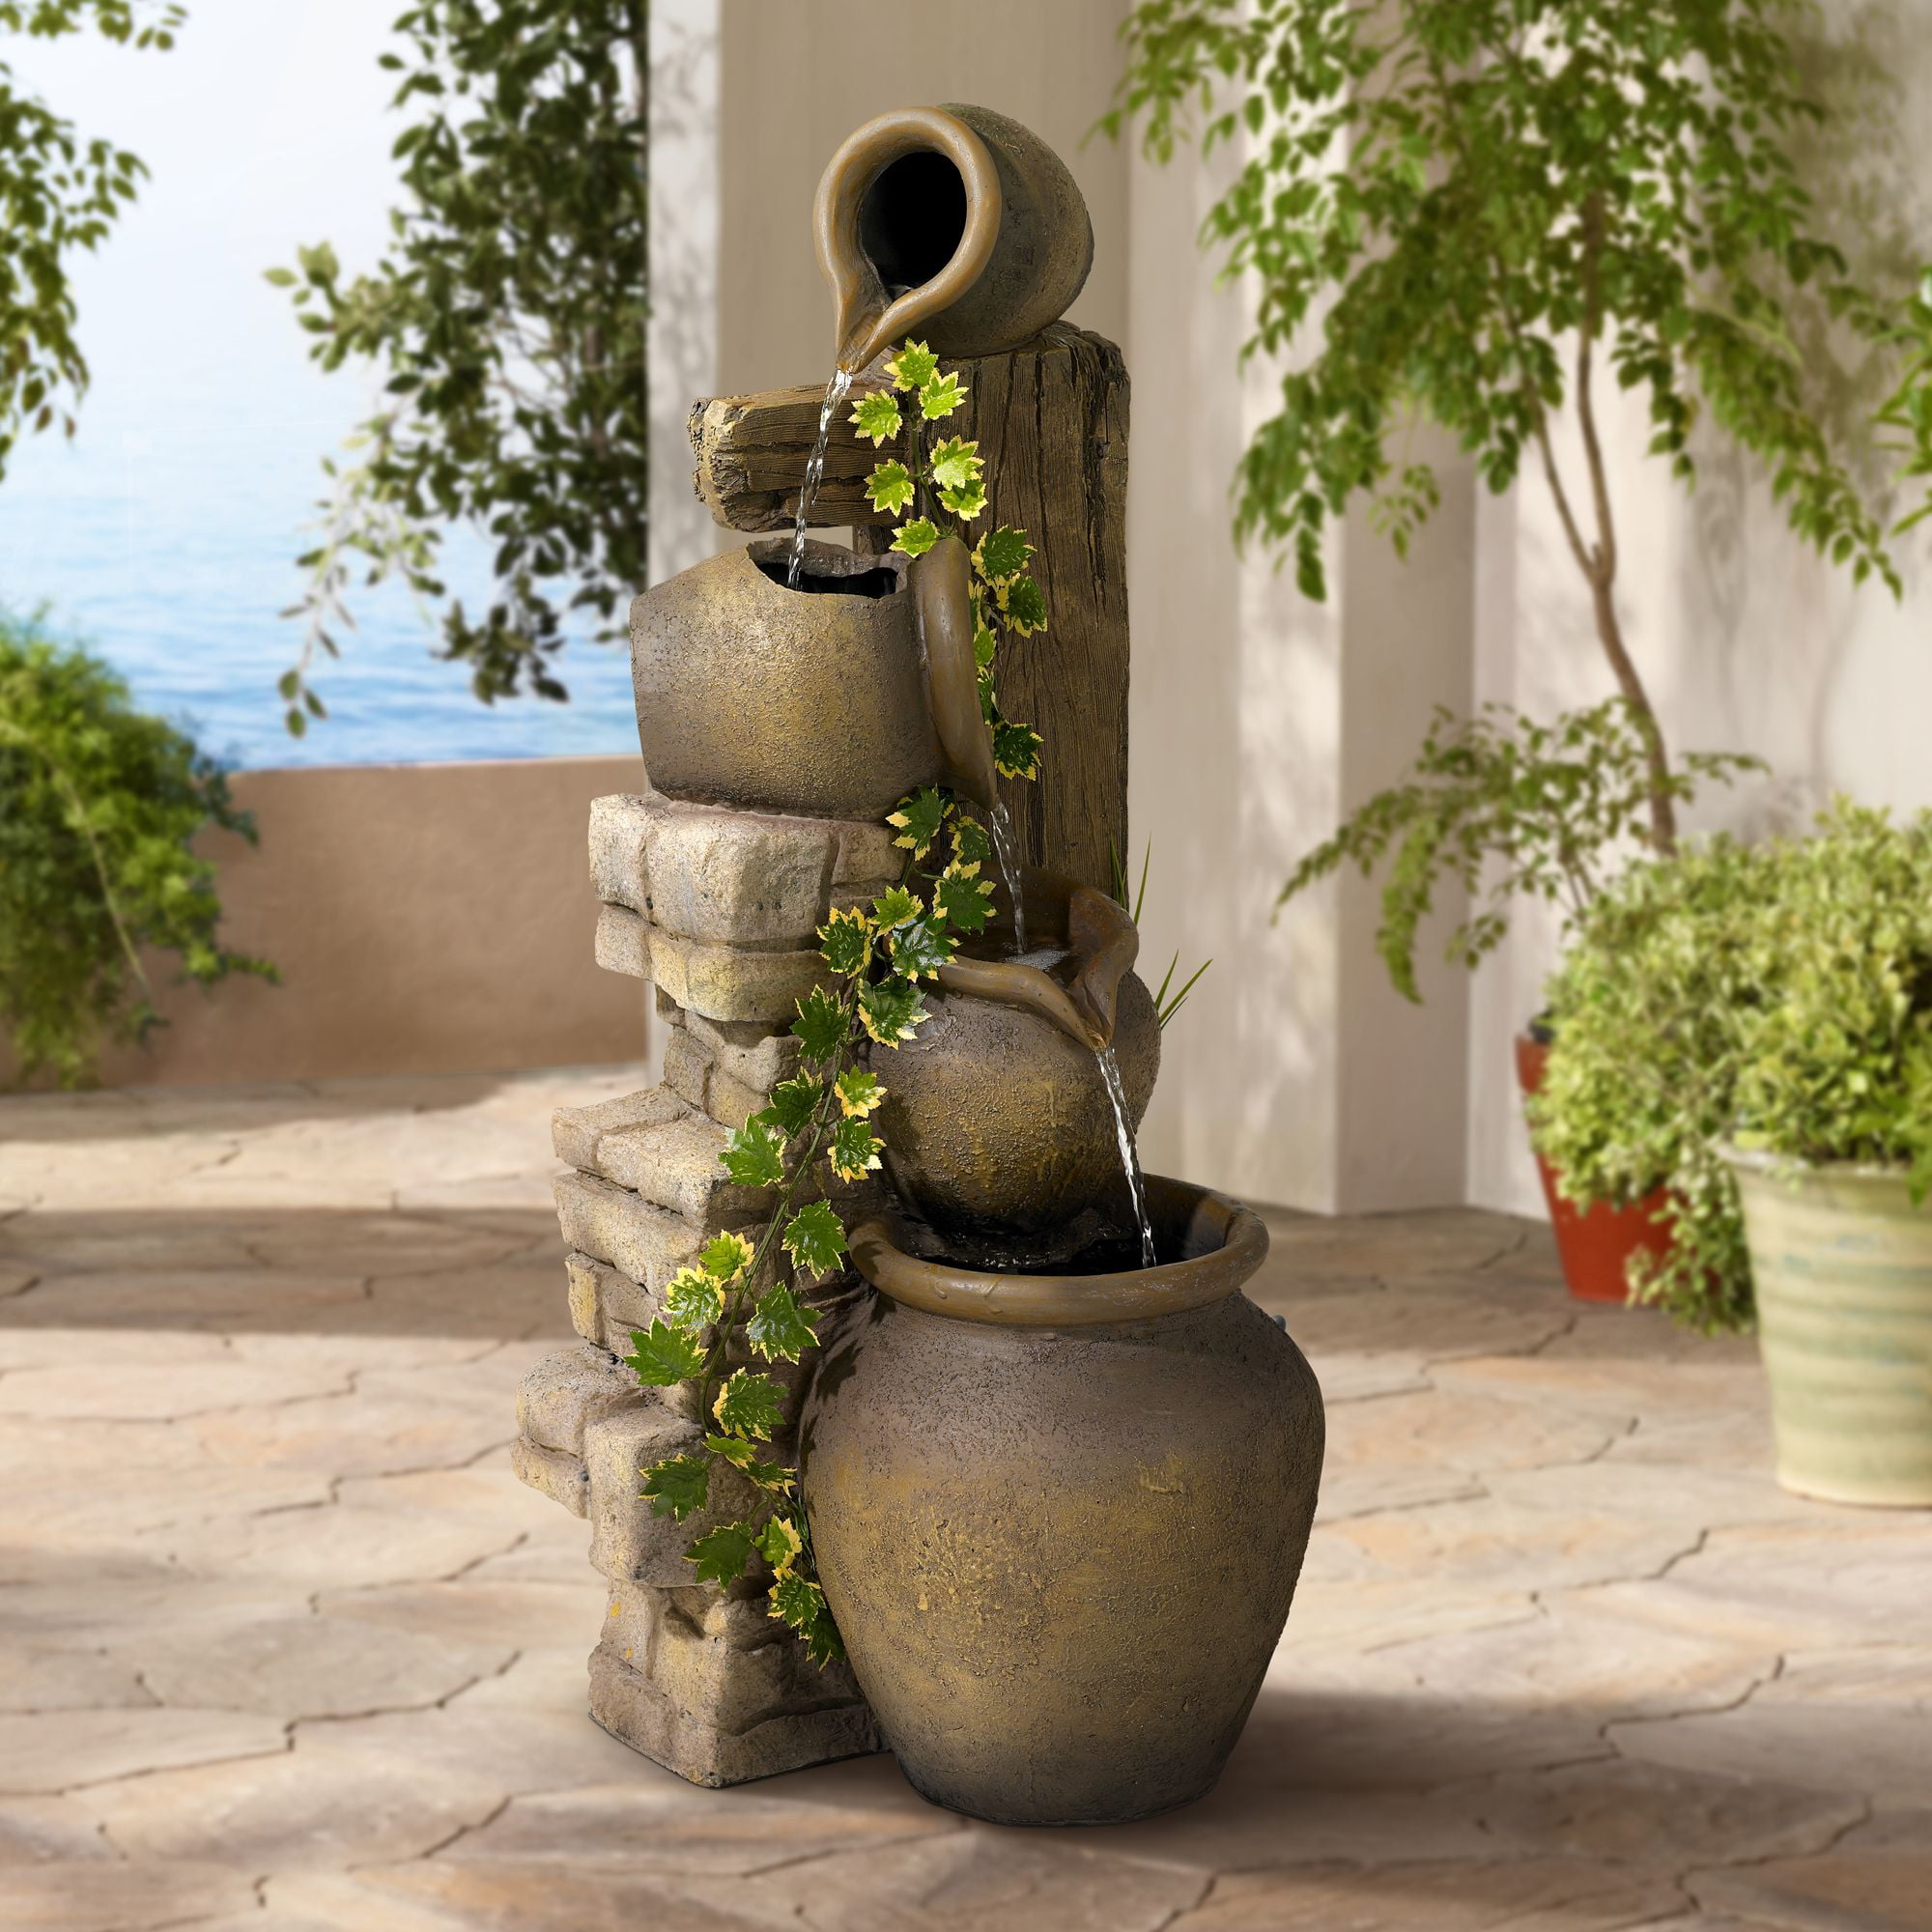 Details about   Rustic Modern Outdoor Floor Water Fountain 41" Cascading Leaves for Yard Garden 